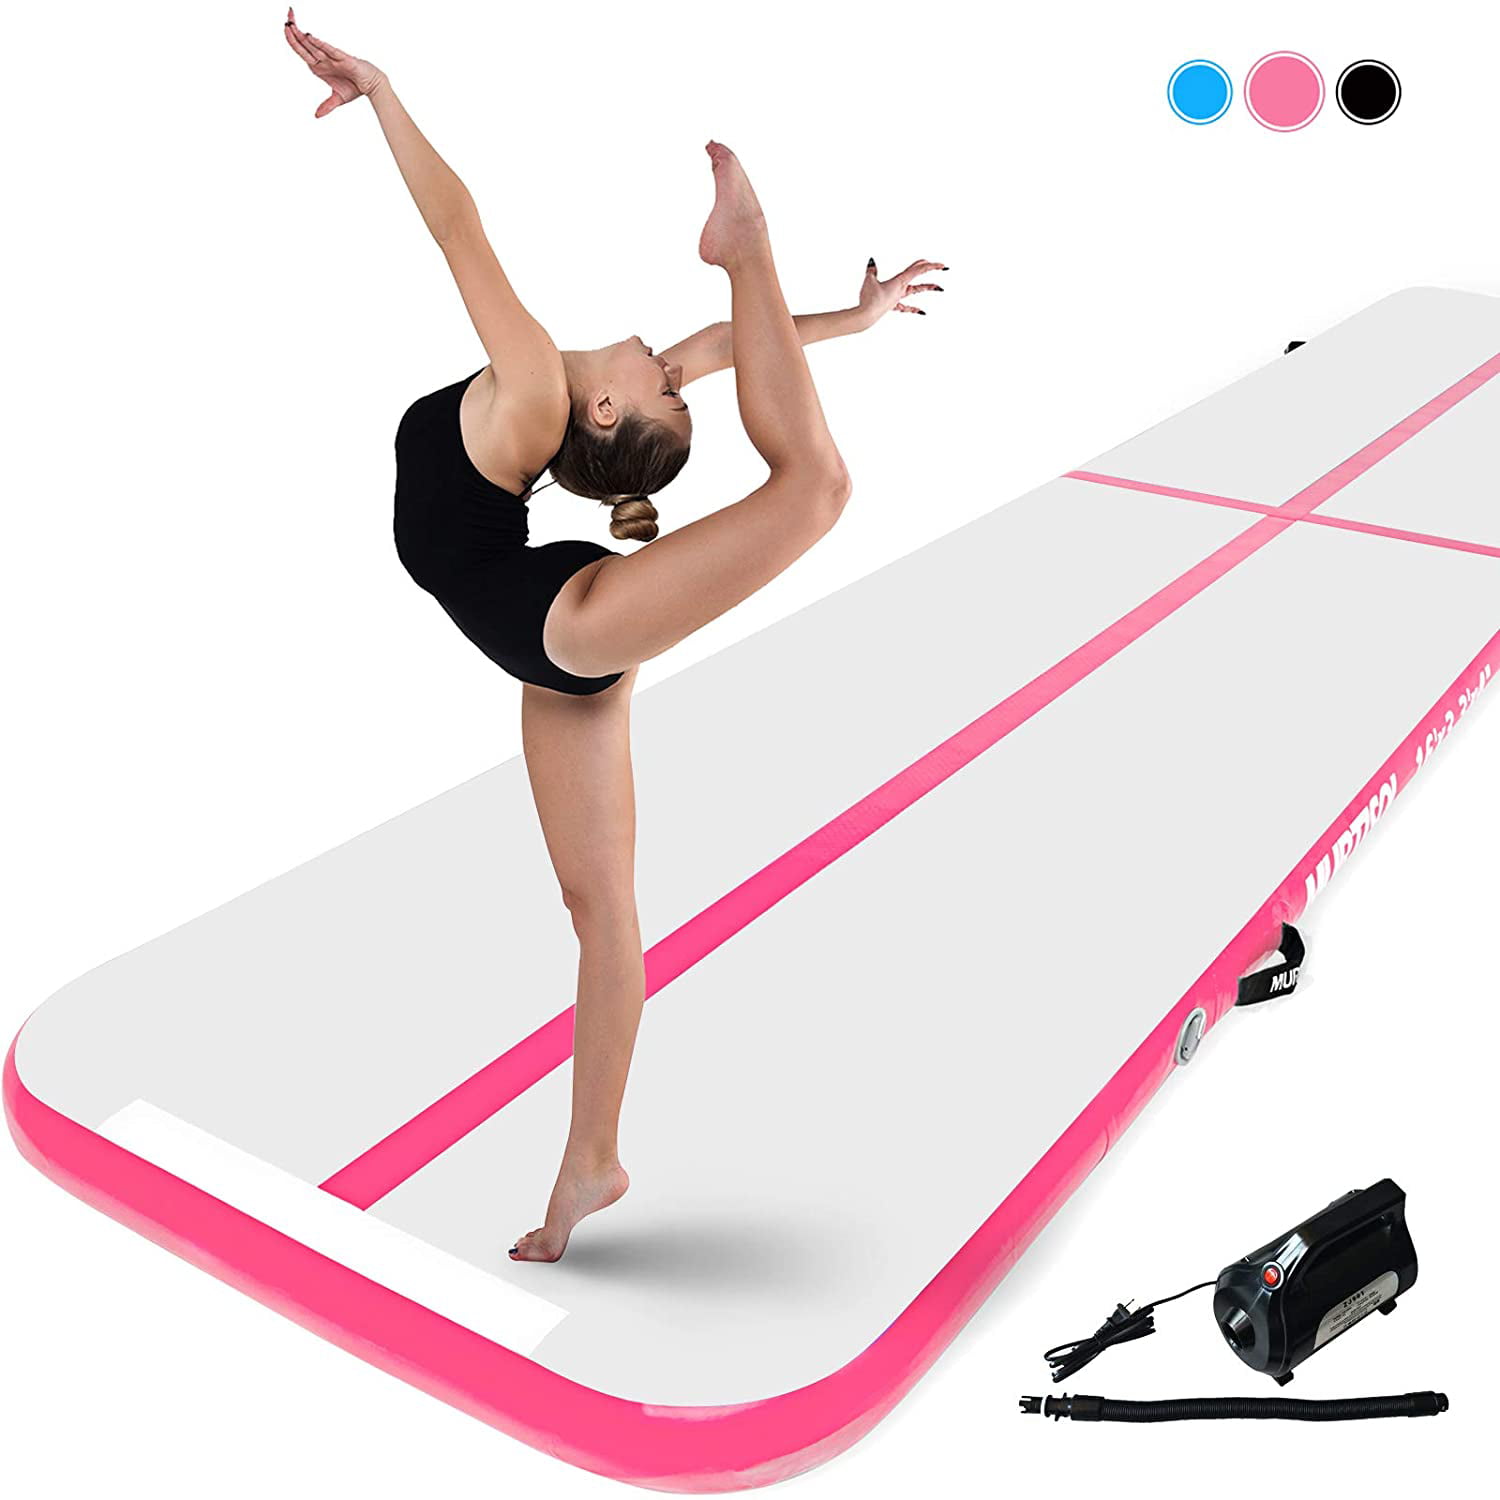 Details about   Heavy Duty Folding Mat Thick Foam Fitness Exercise Gymnastic Panel Workout 6’x2' 